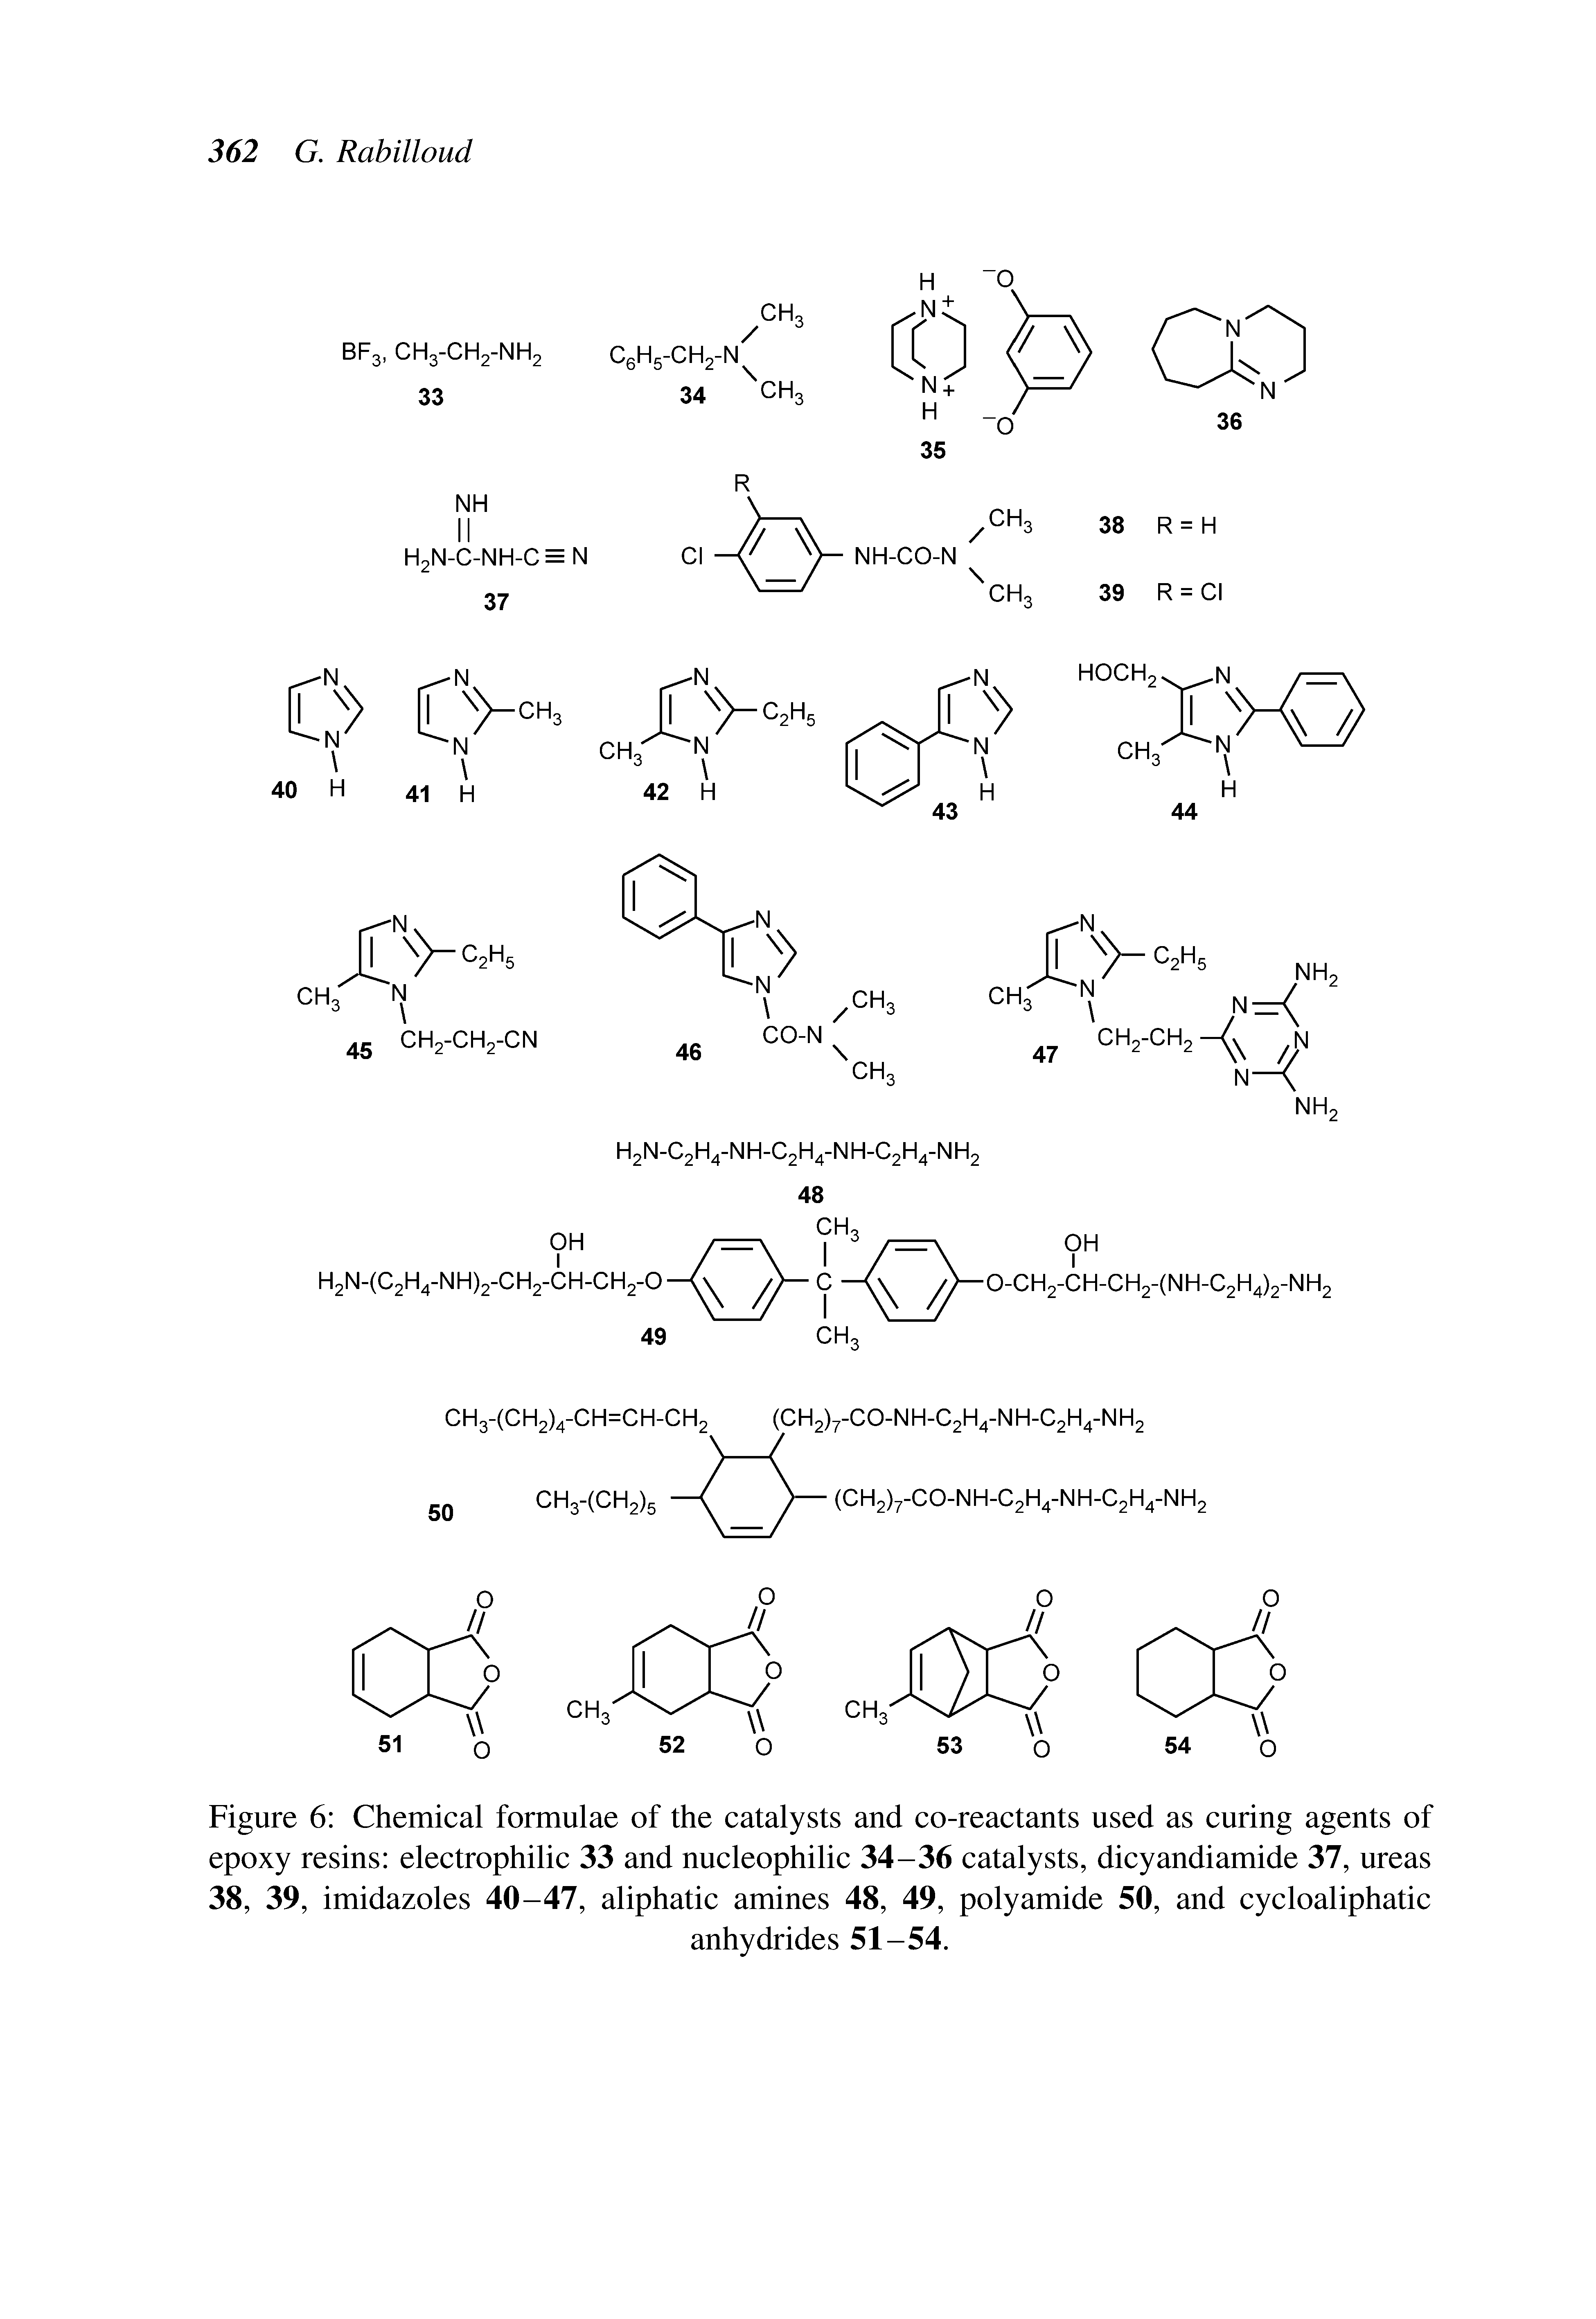 Figure 6 Chemical formulae of the catalysts and co-reactants used as curing agents of epoxy resins electrophilic 33 and nucleophilic 34-36 catalysts, dicyandiamide 37, ureas 38, 39, imidazoles 40-47, aliphatic amines 48, 49, polyamide 50, and cycloaliphatic...